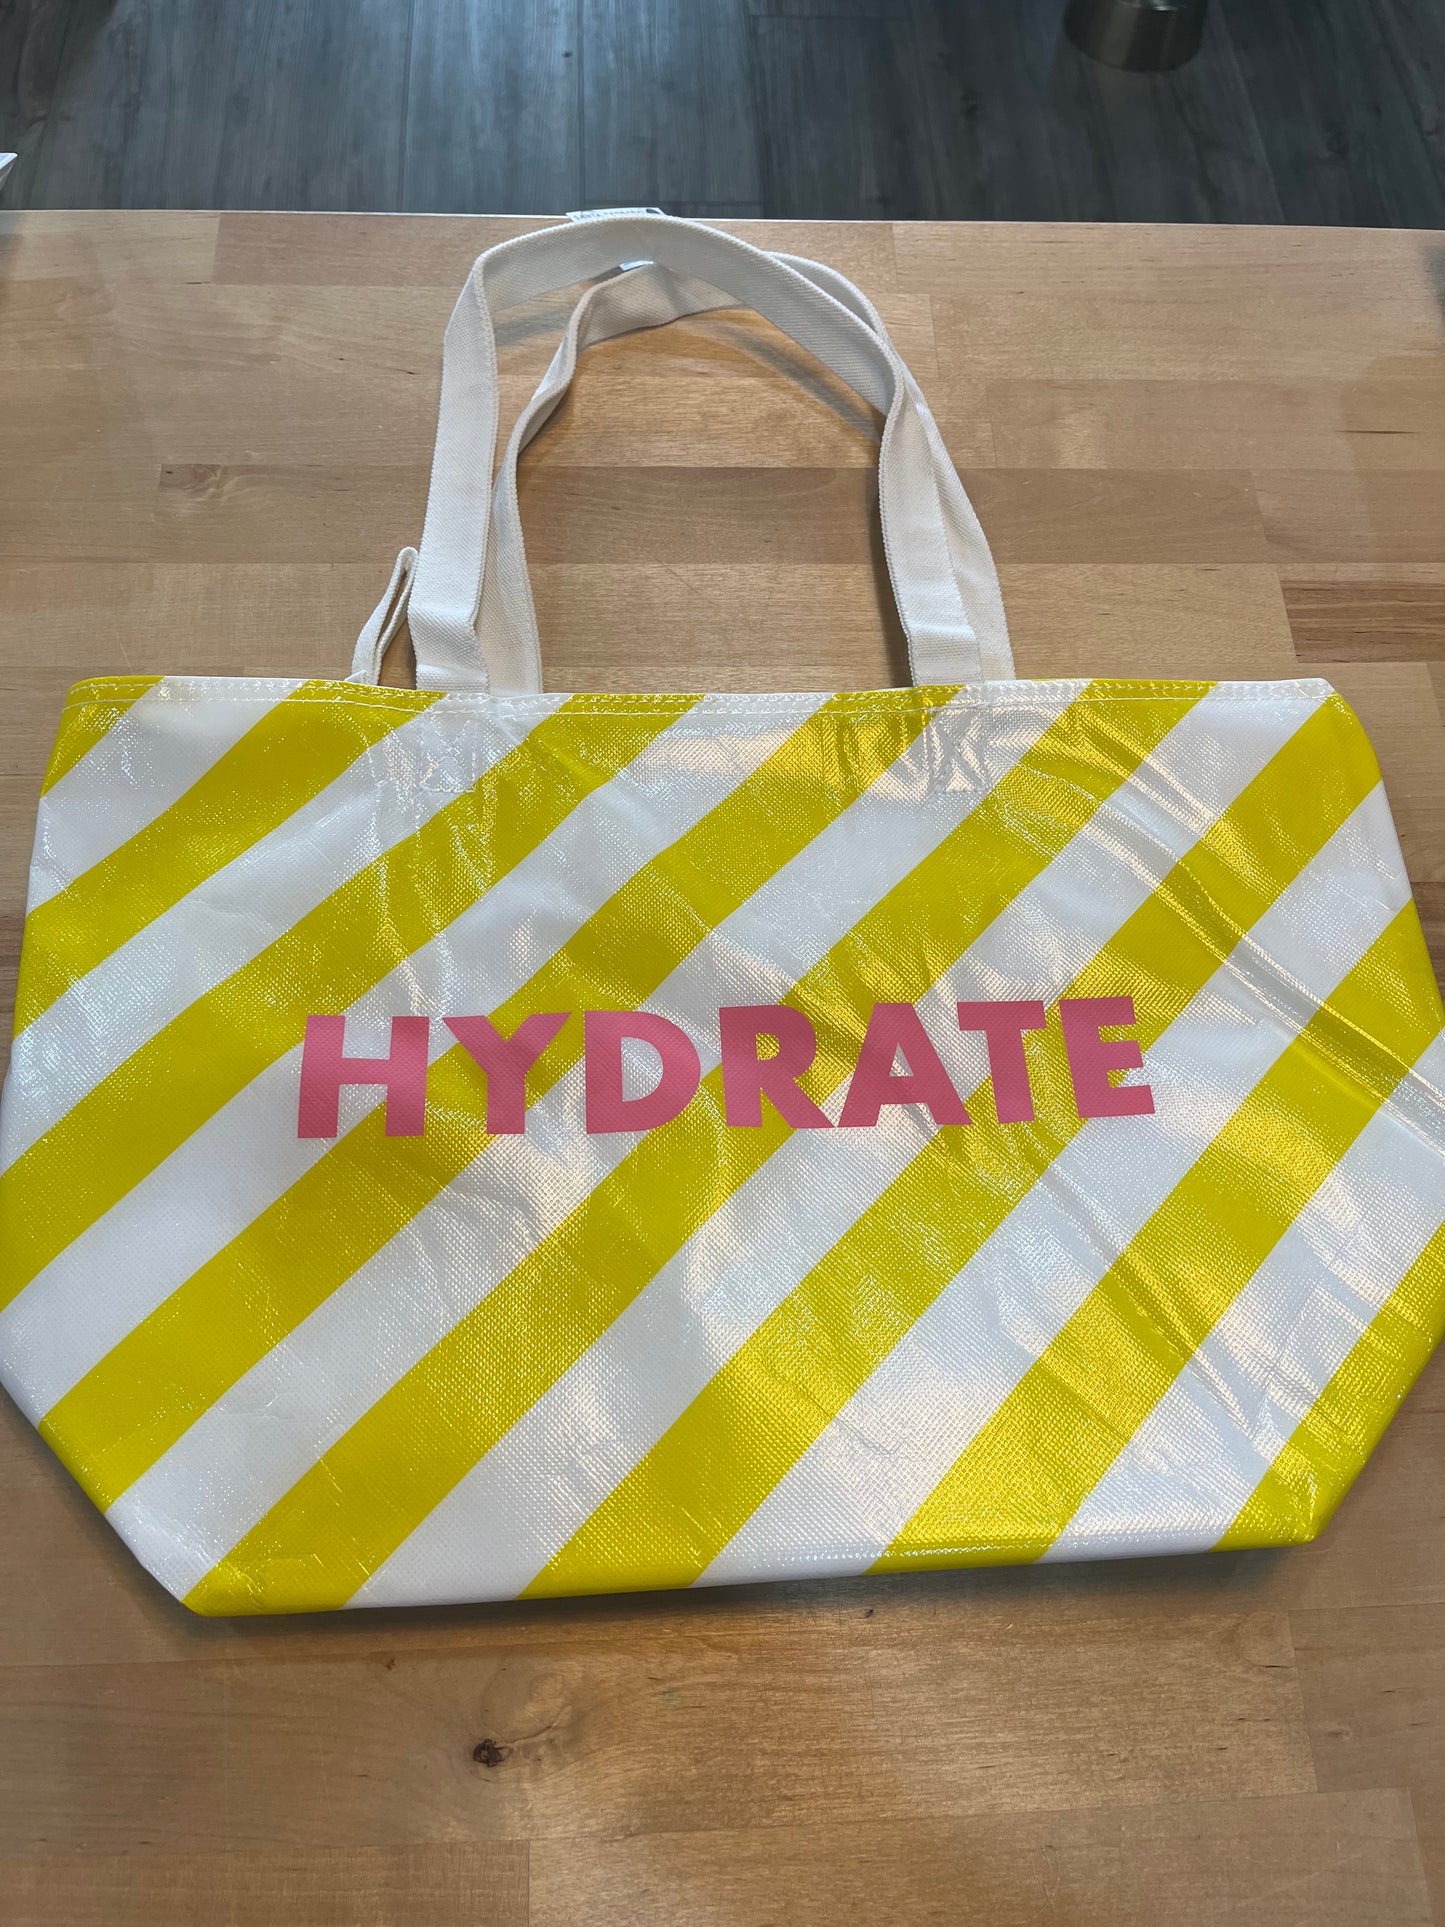 Insulated tote bags